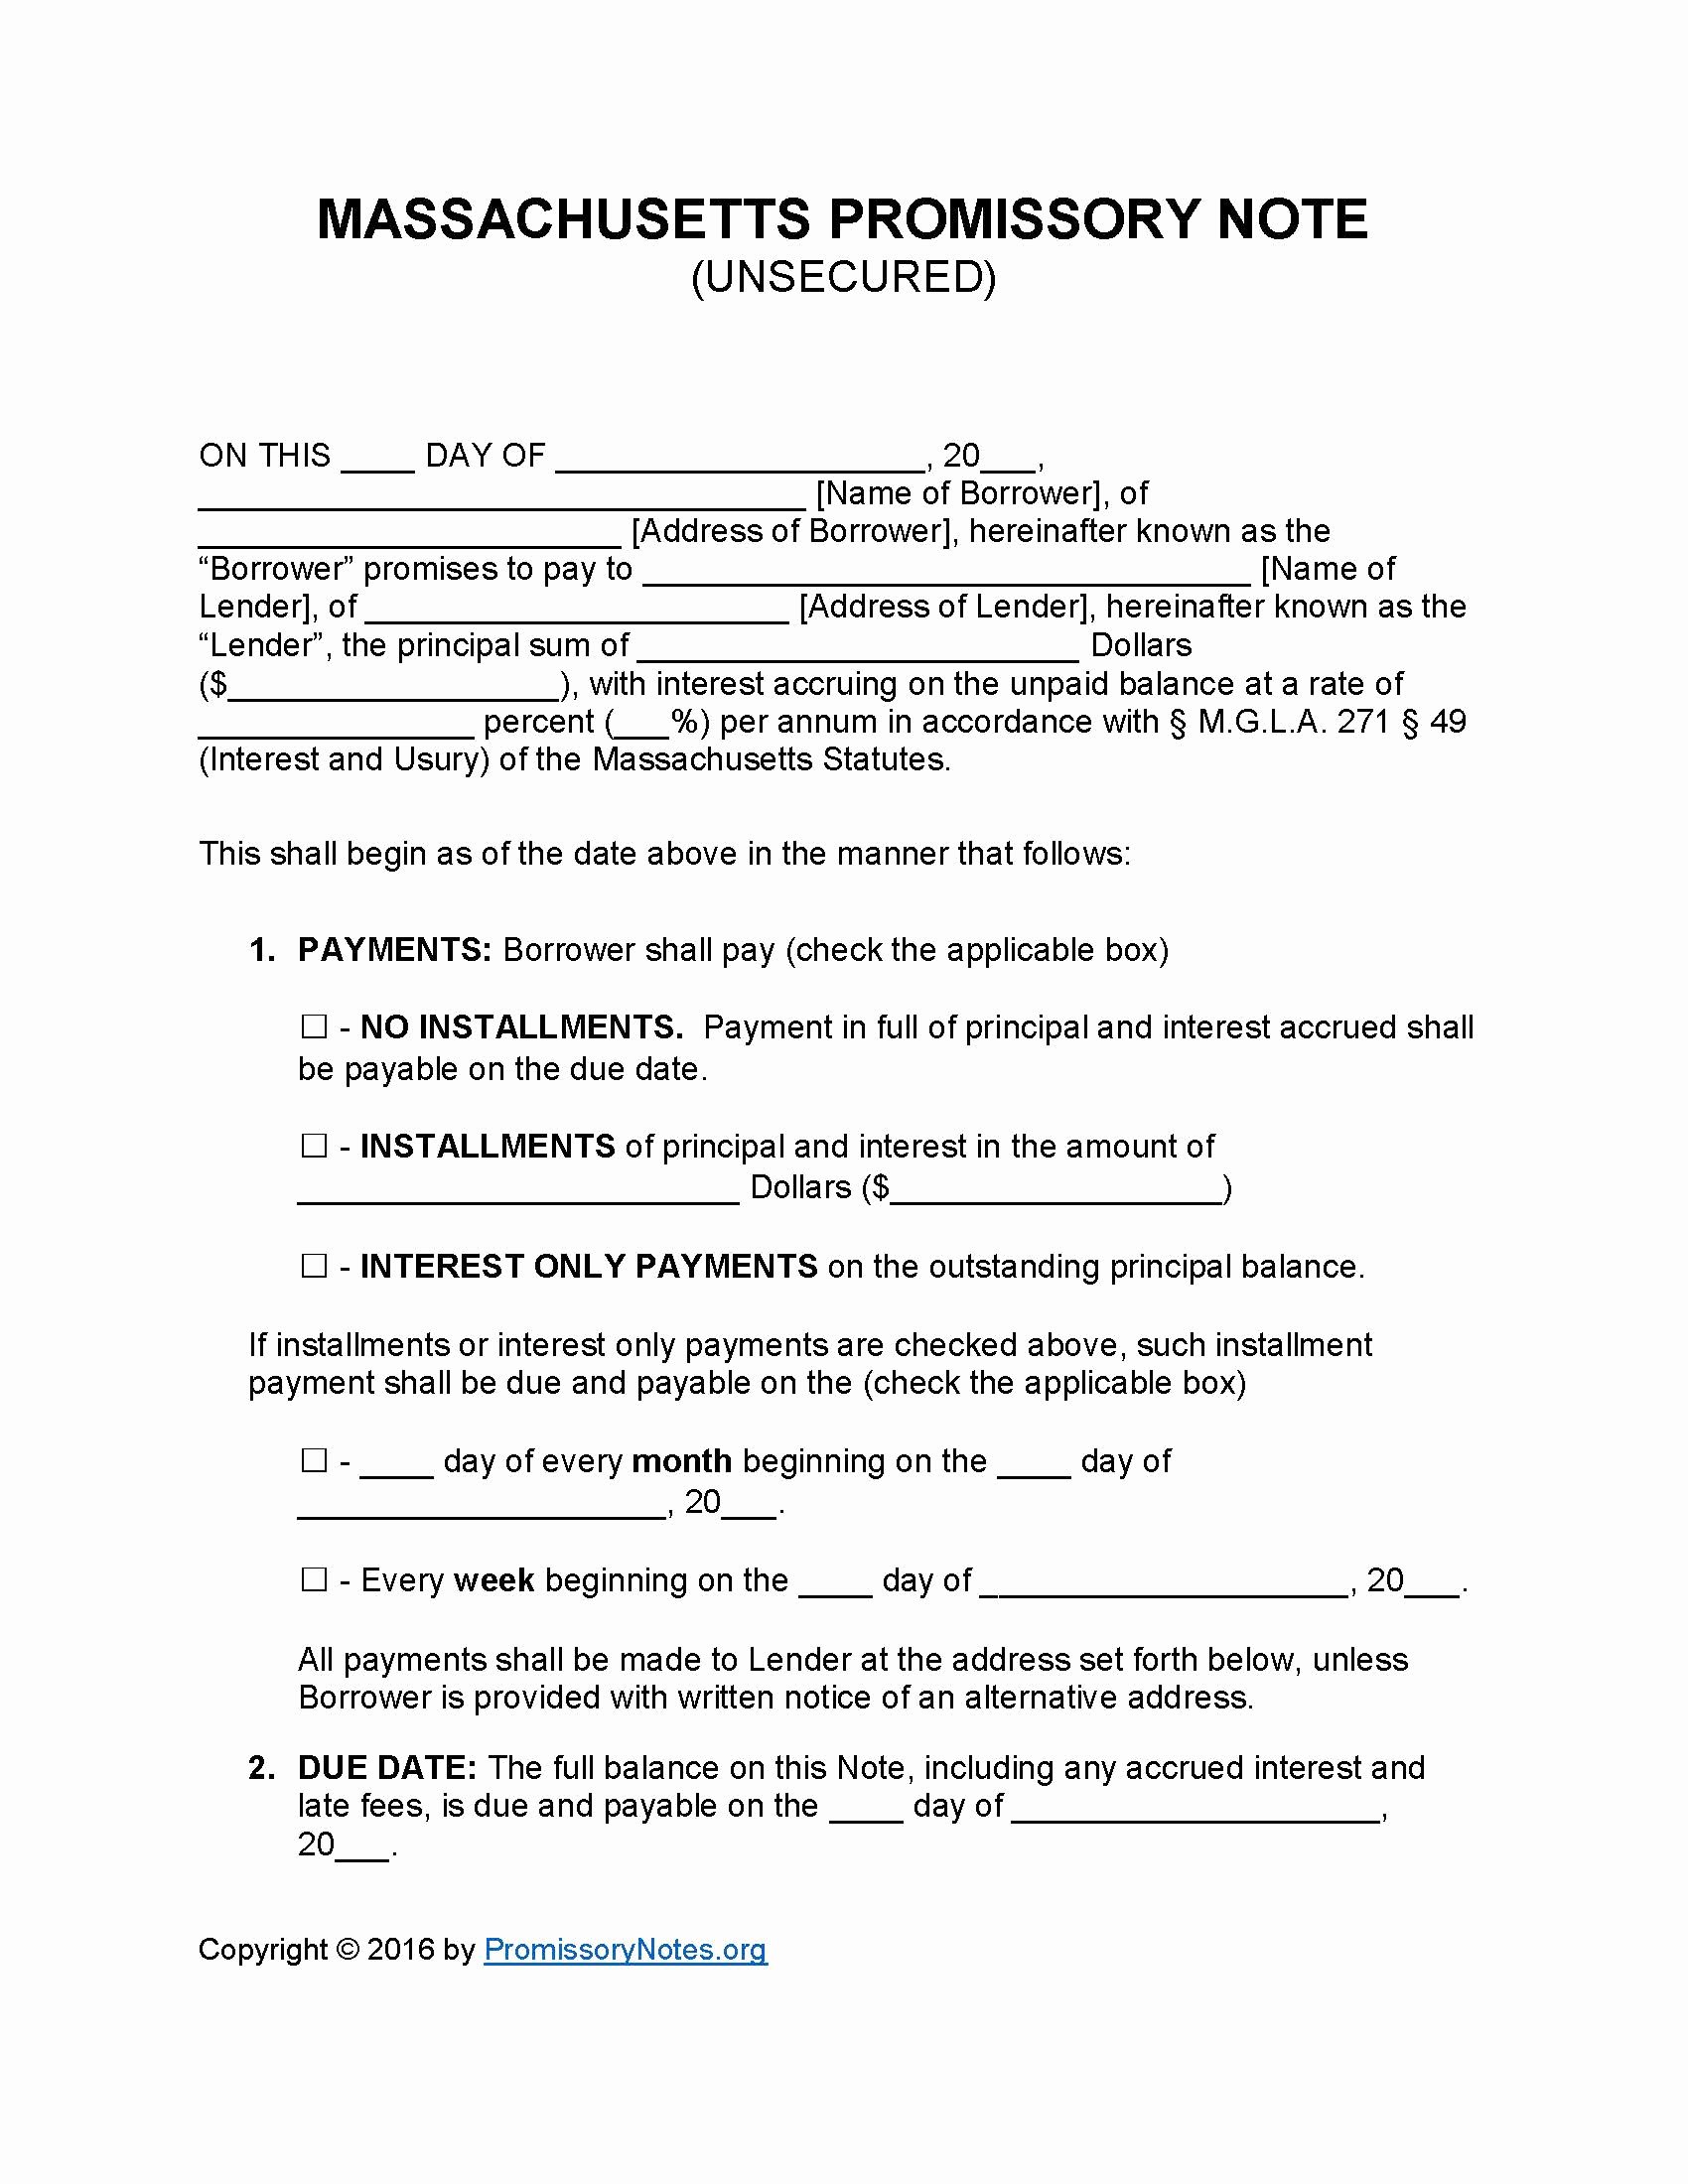 Unsecured Promissory Note Template Lovely Massachusetts Unsecured Promissory Note Template